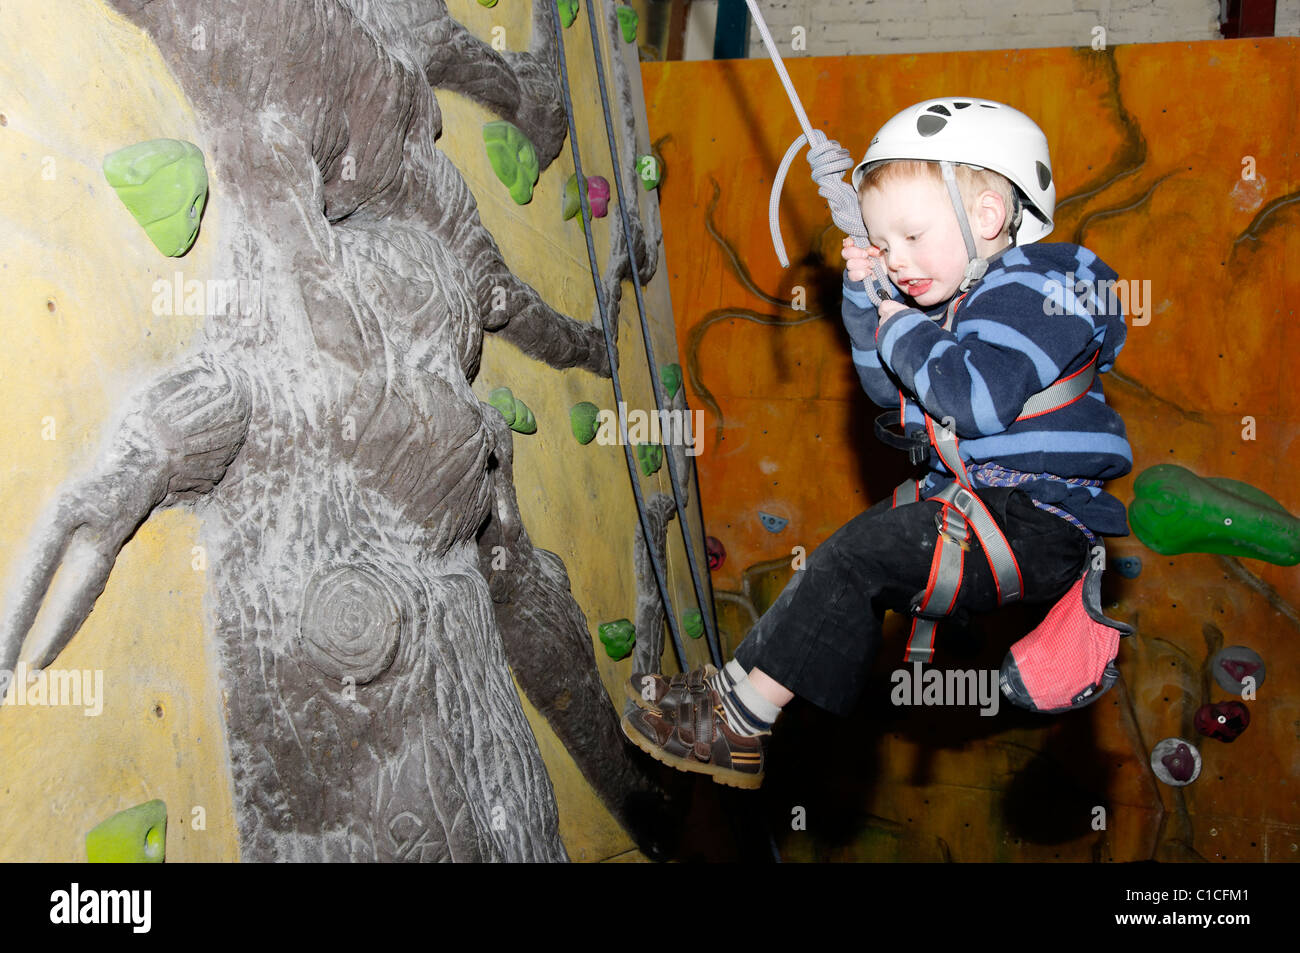 A young boy swinging on a rope at an indoor climbing wall Stock Photo